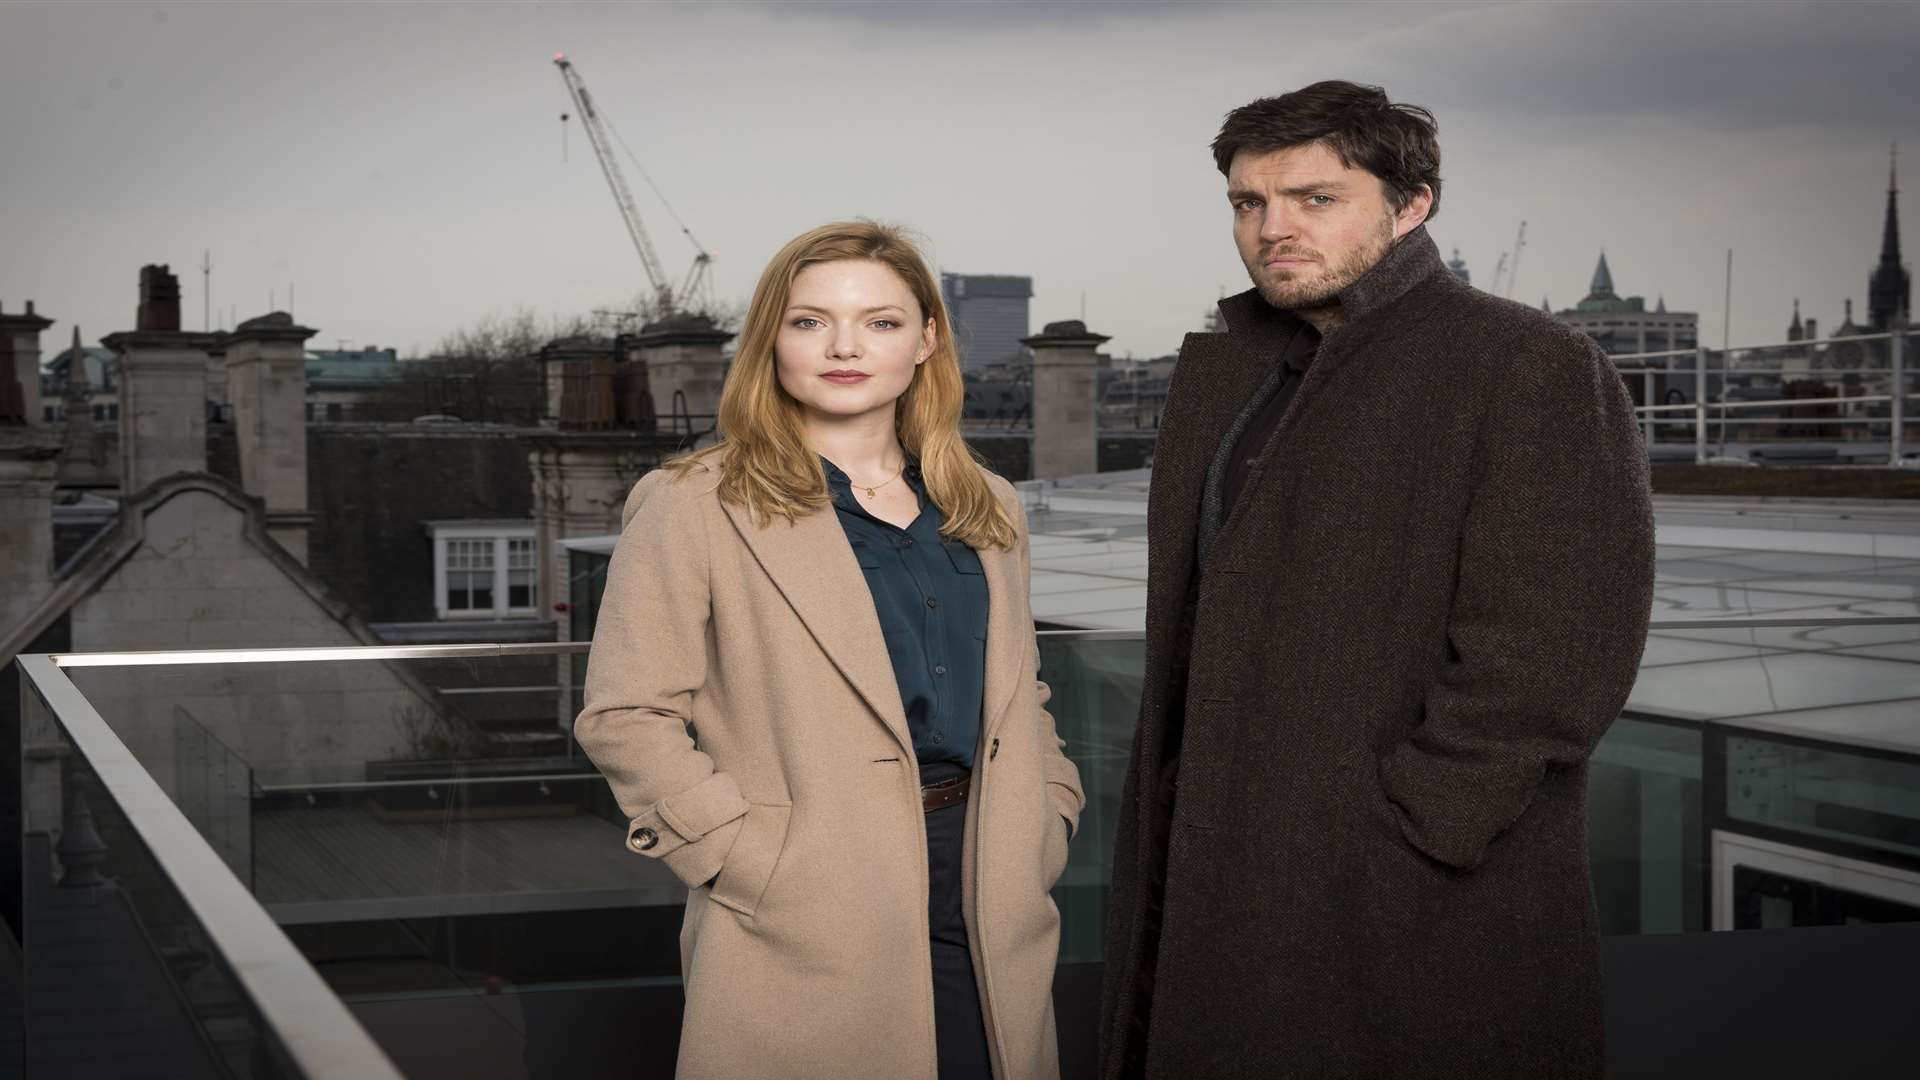 The Silk Worm was filmed in part at Penshurst Place in Kent for the BBC, starring Holliday Grainger and Tom Burke. Picture: BBC